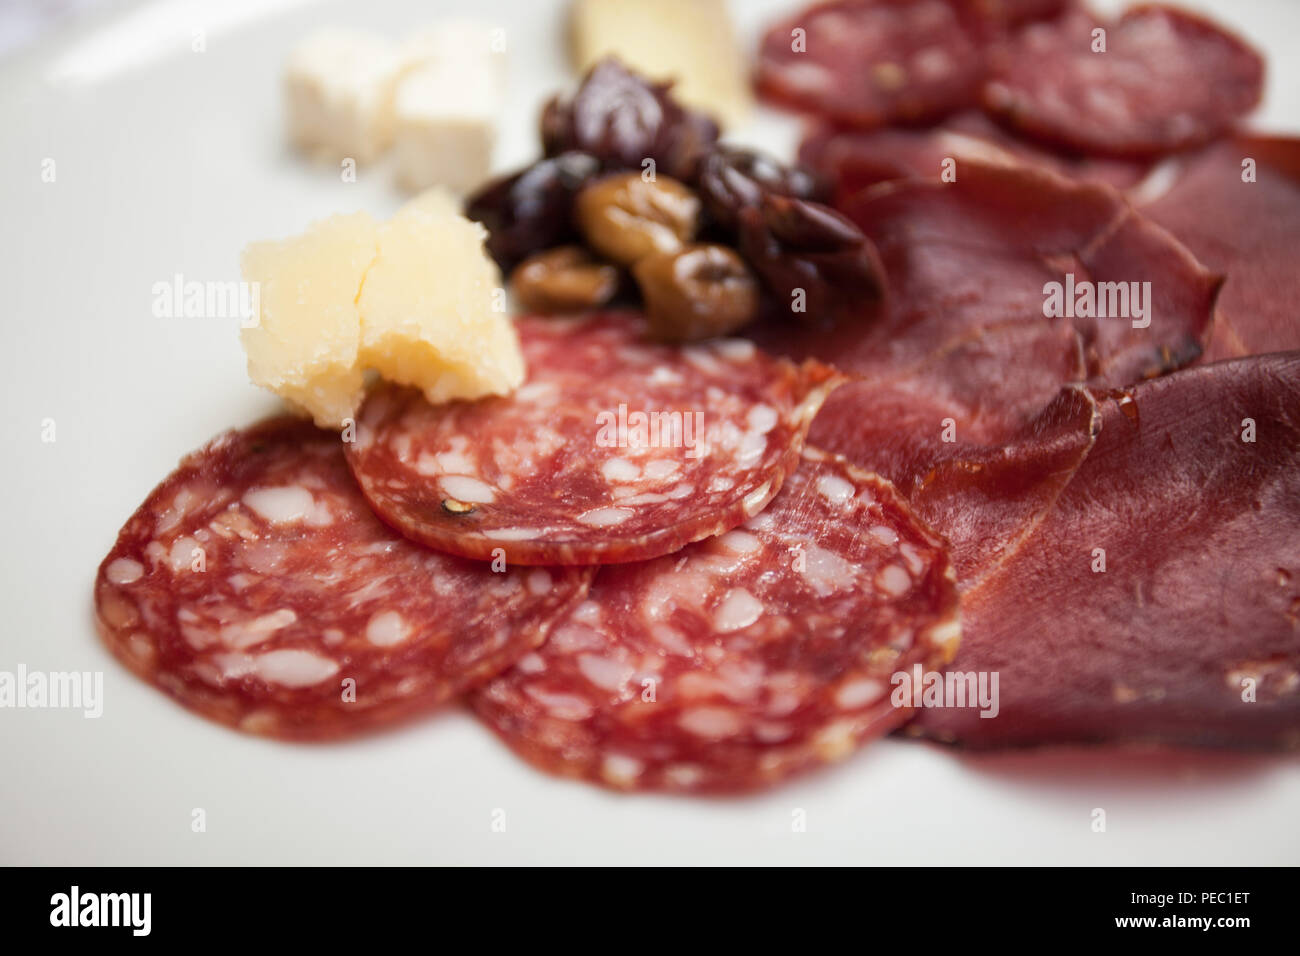 Italian appetizer in a wedding party:deer and wild boar salami, venison ham, seasoned Sardinian pecorino cheese, feta cheese and olives. Stock Photo